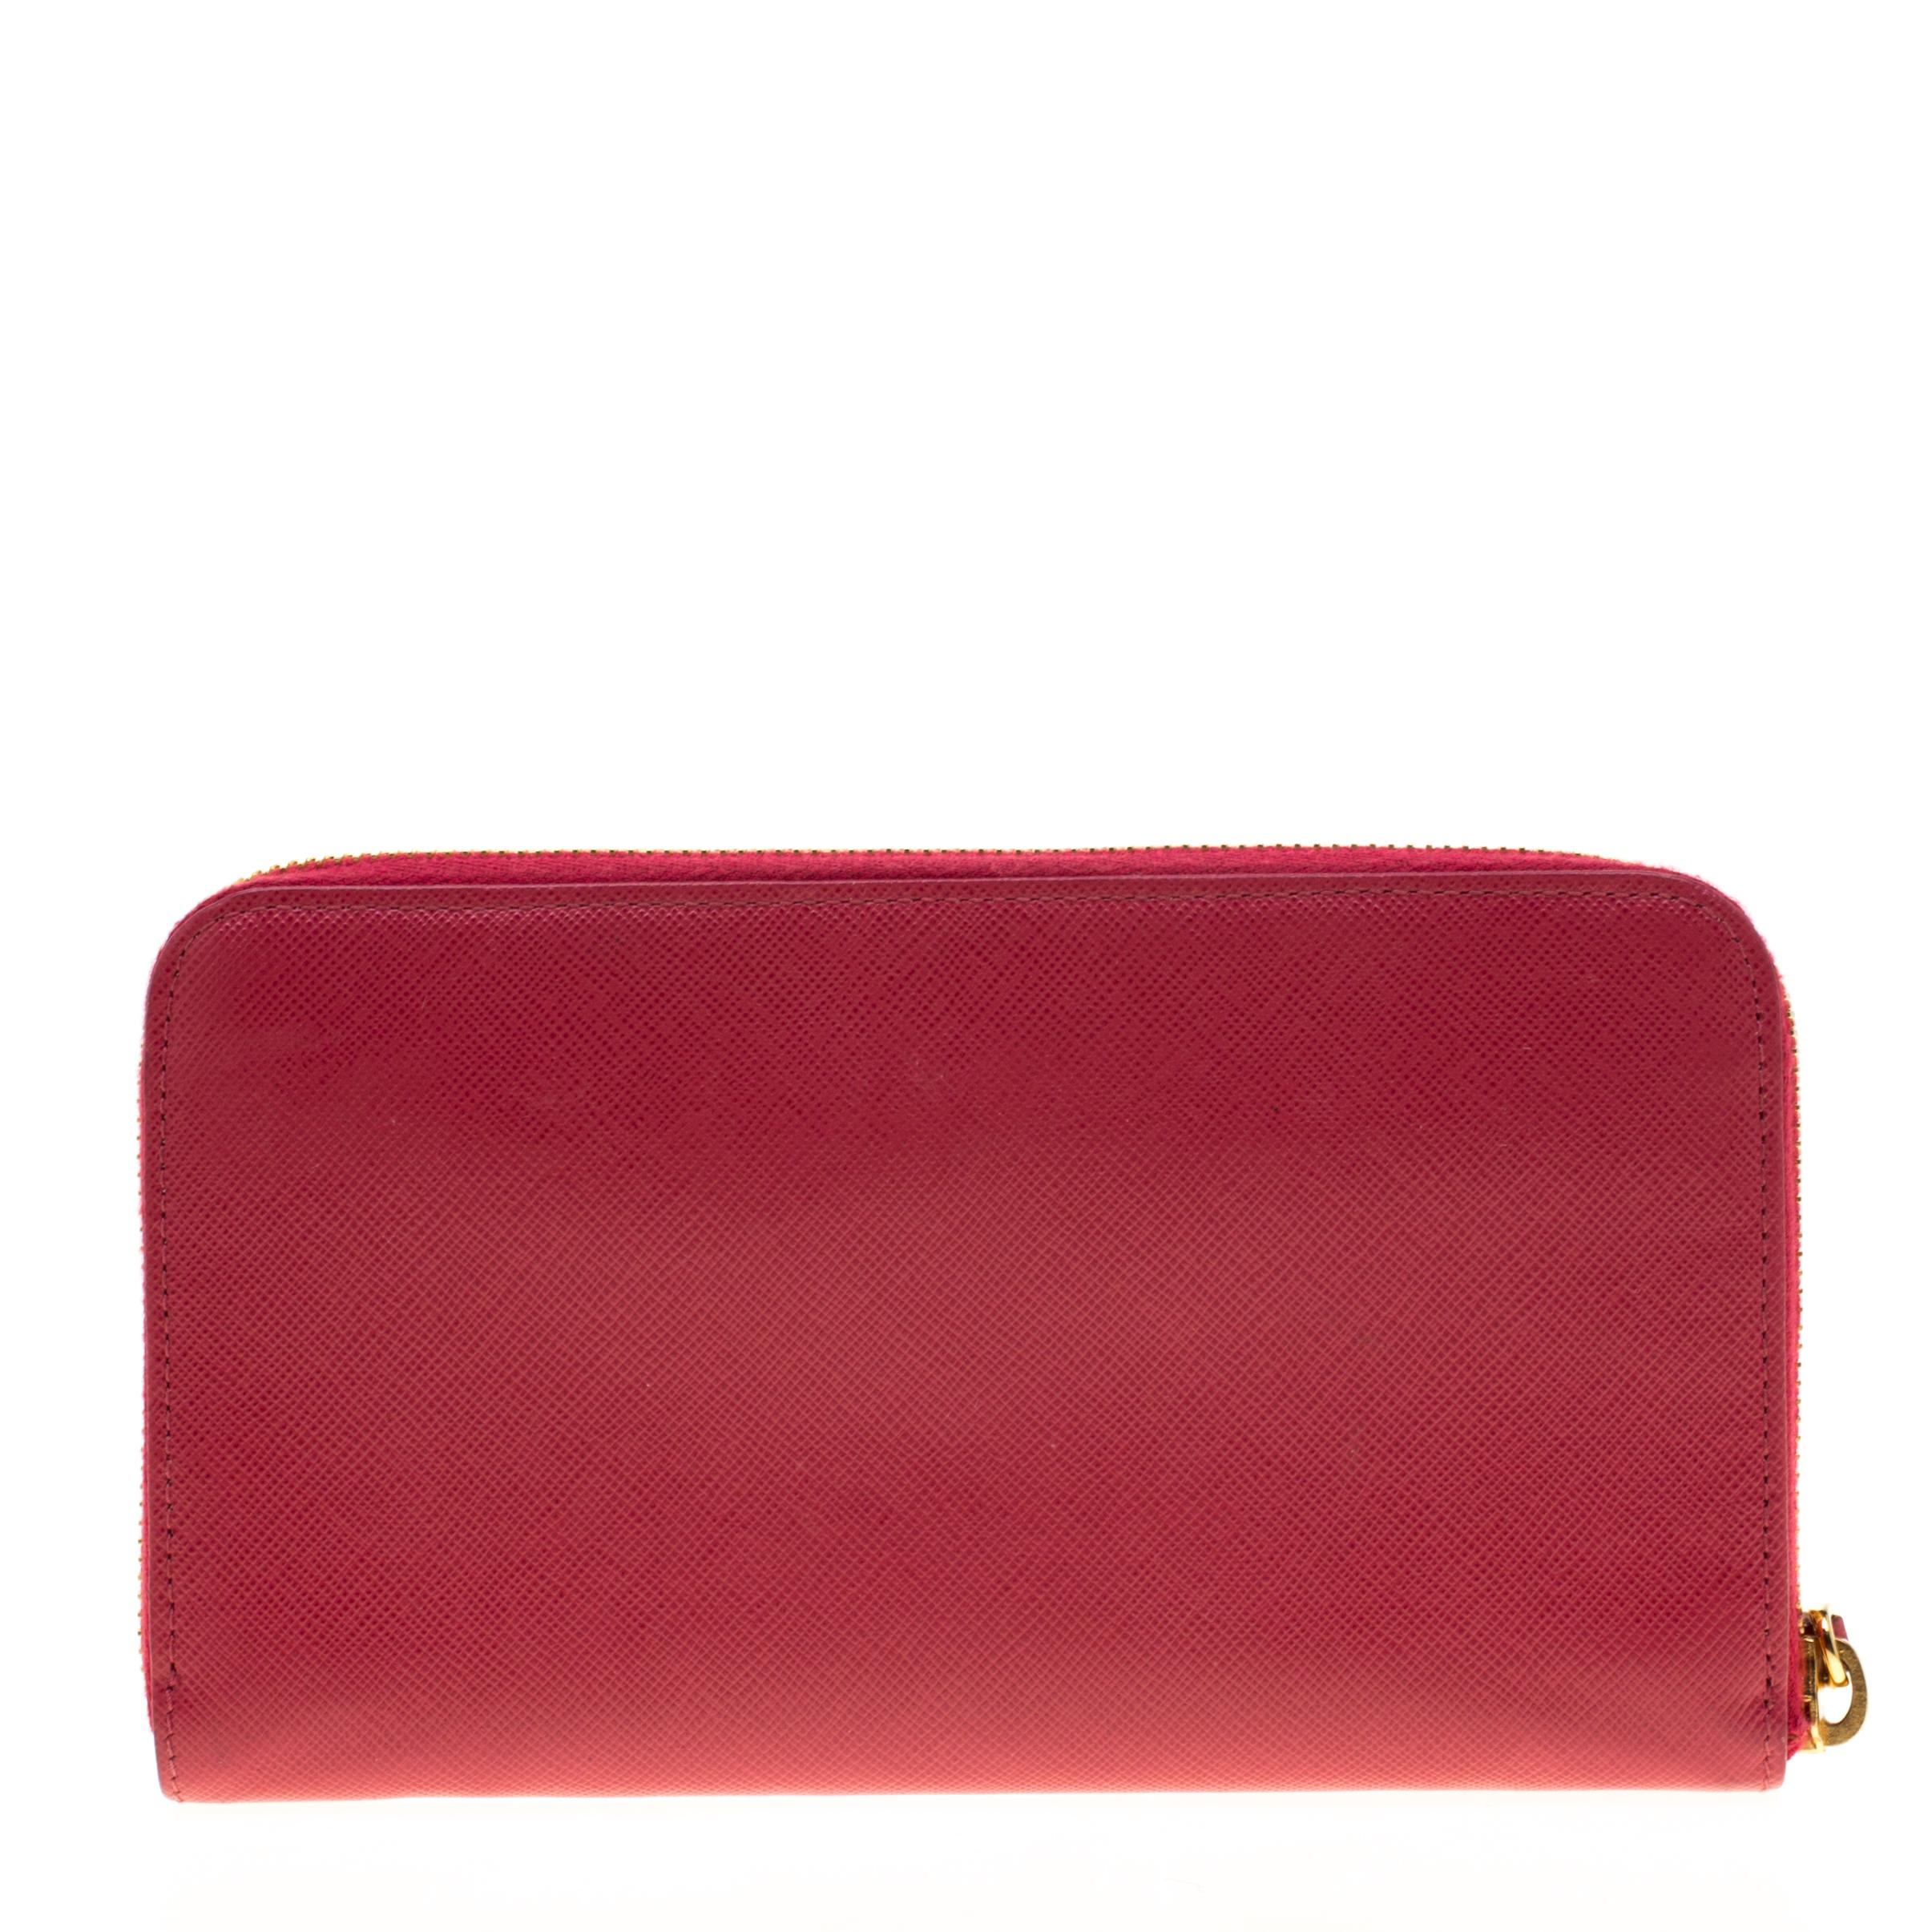 Crafted from hot pink Saffiano leather, this wallet from Prada is sleek and sophisticated. The zip around wallet opens to a nylon-lined interior that houses multiple card slots, two open compartments for currency and bills and one zipped coin